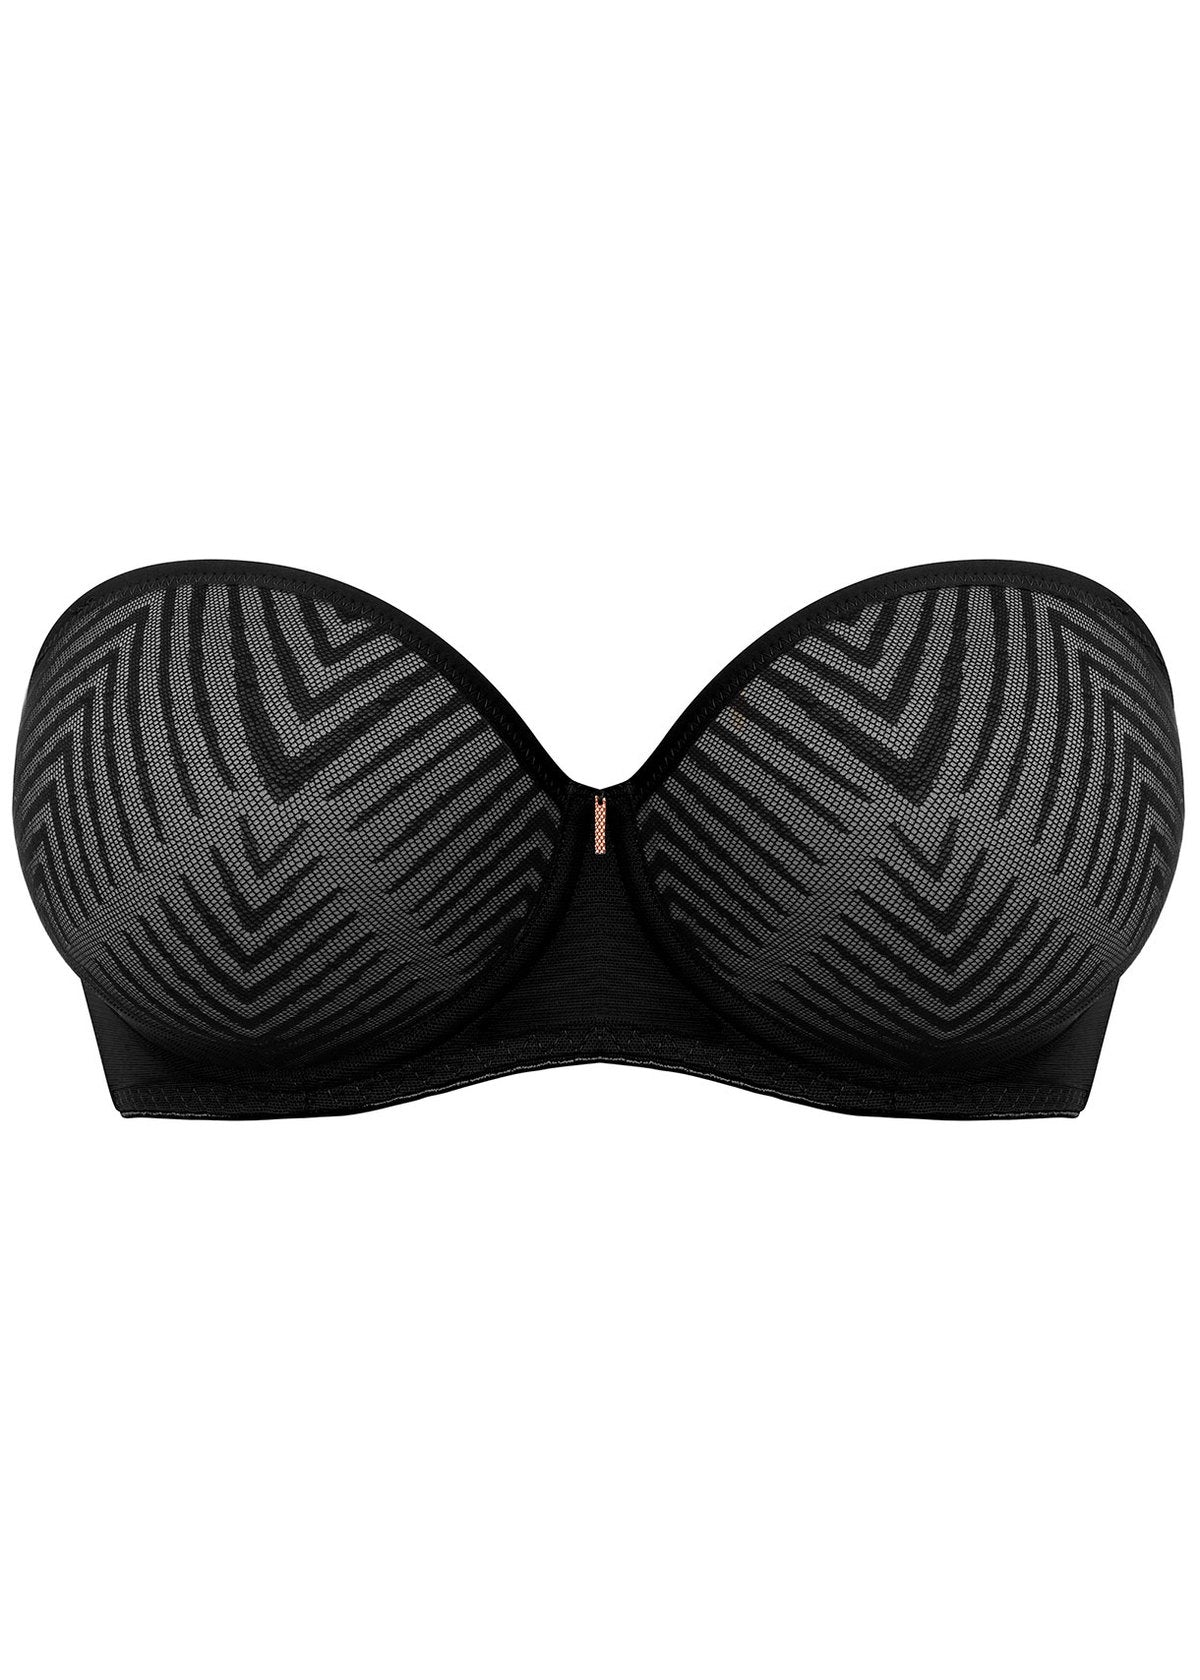 Tailored UW Moulded Strapless In Black - Freya